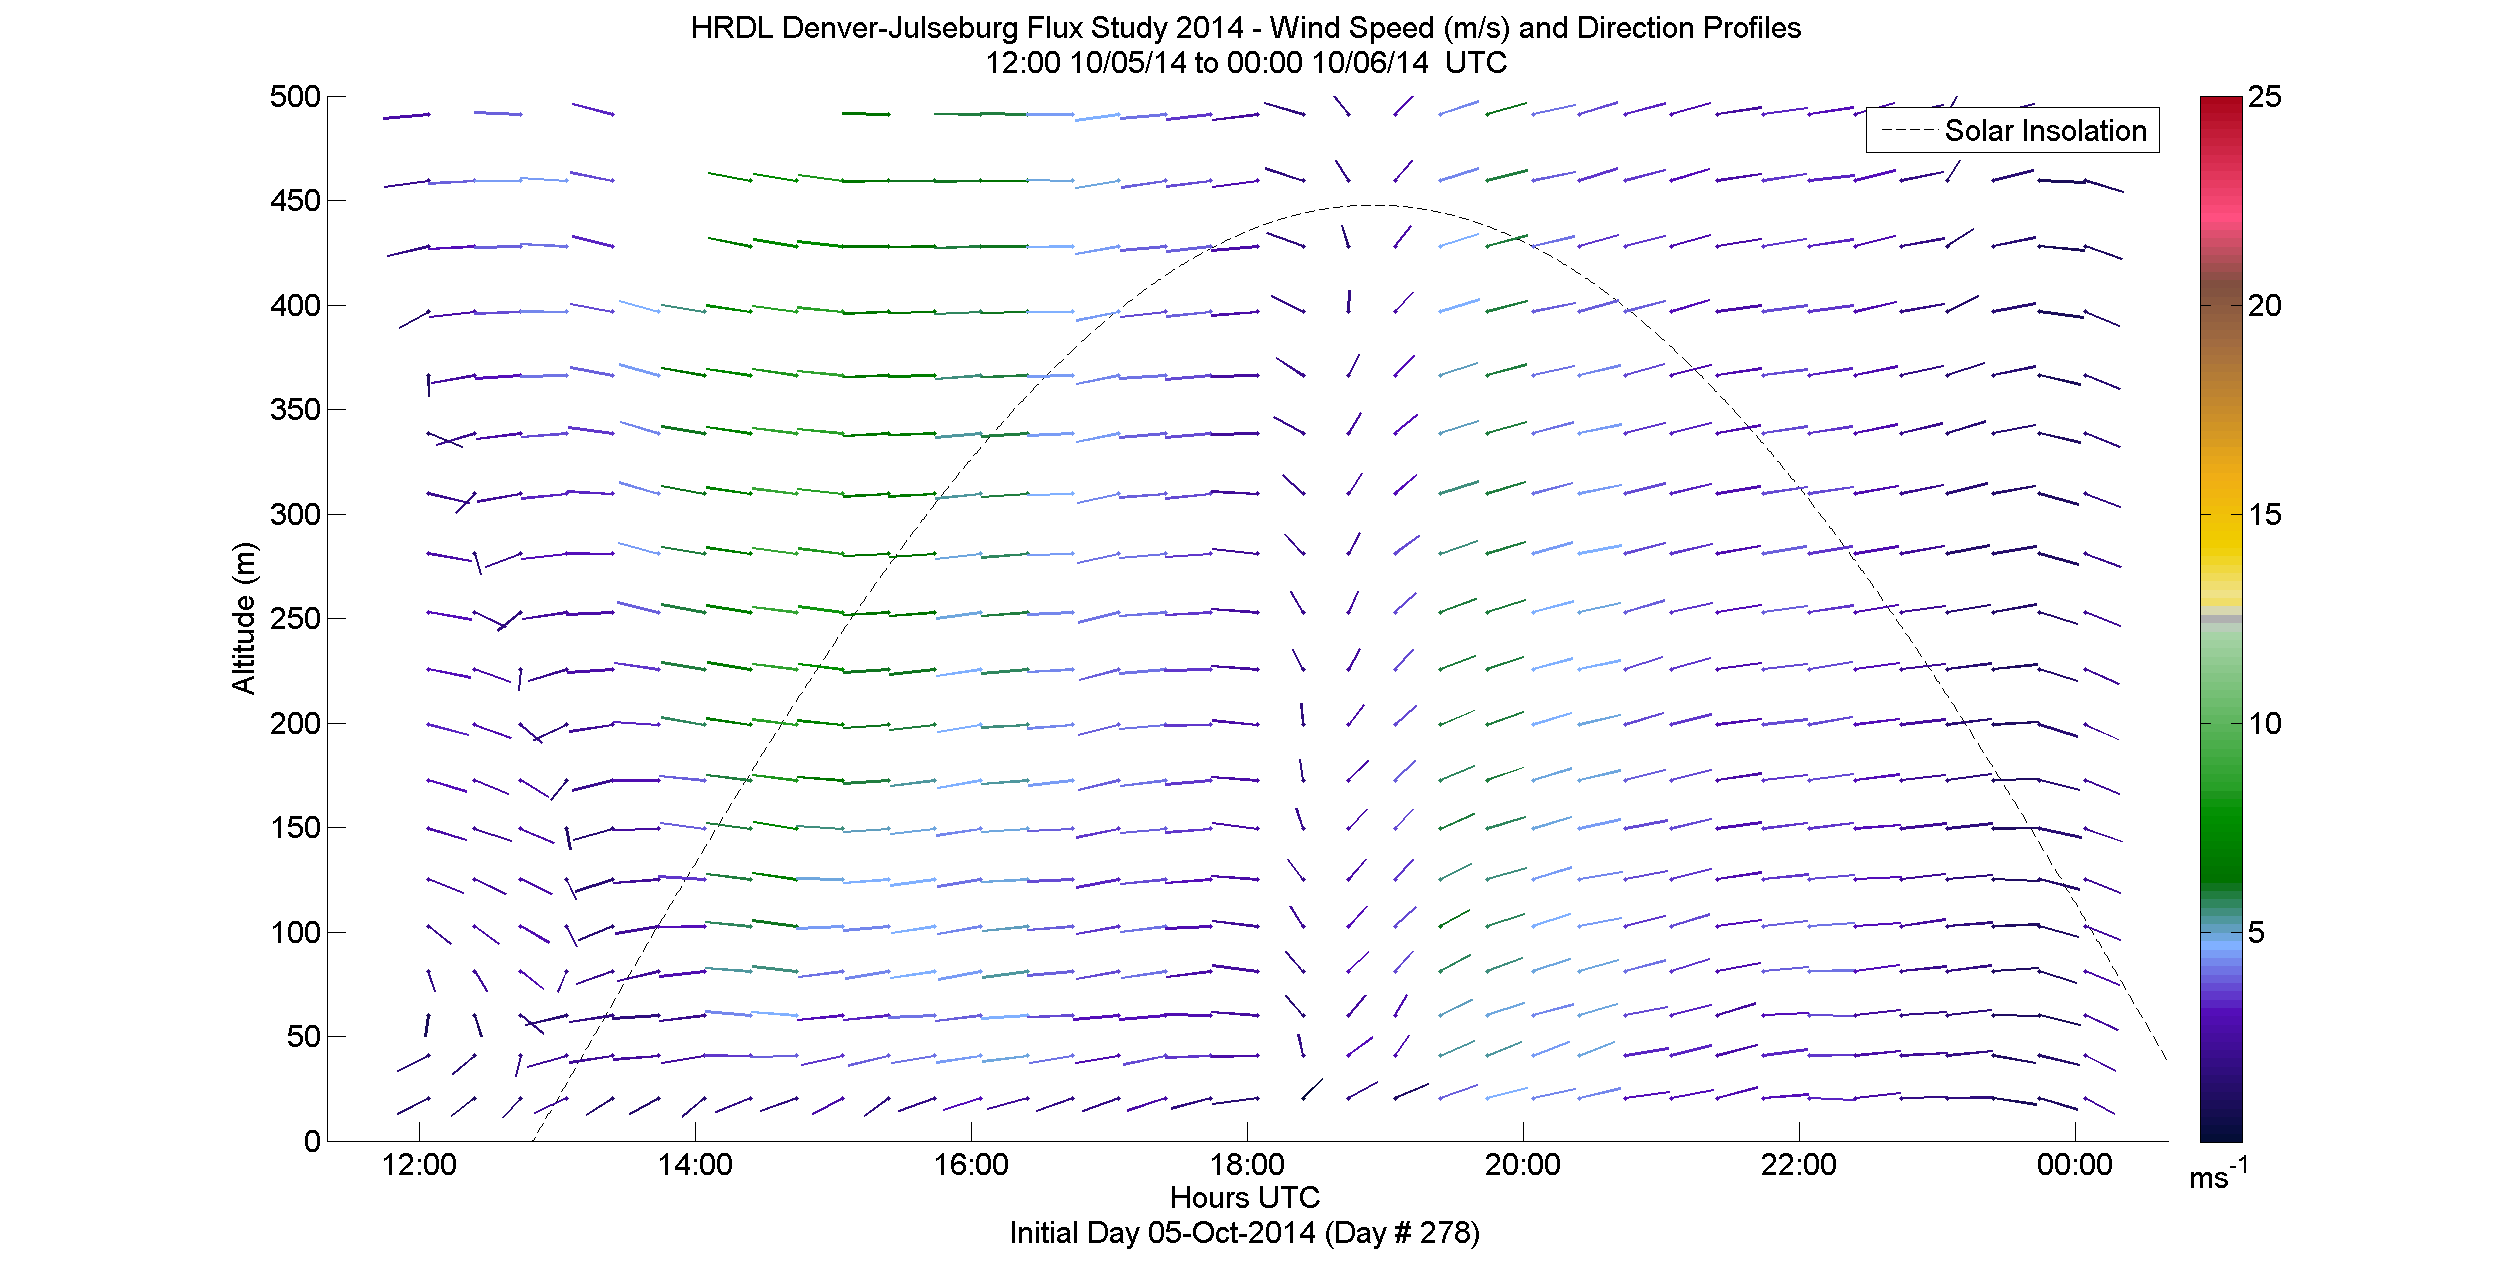 HRDL speed and direction profile - October 5 pm